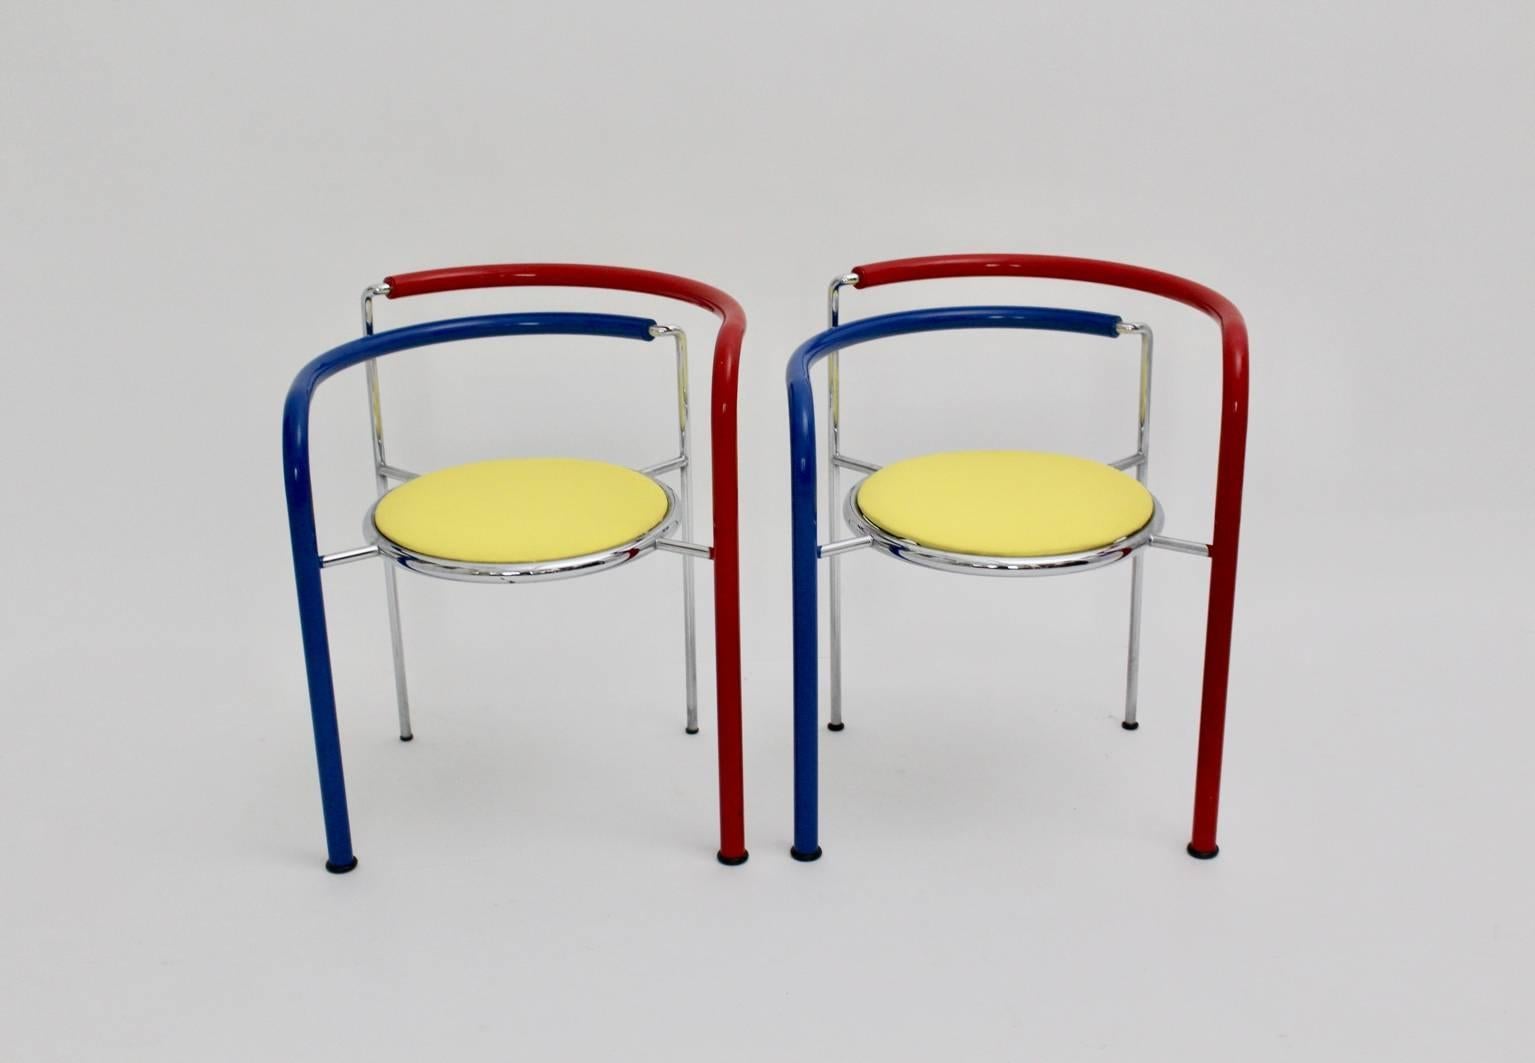 This pair of red, blue and yellow colored armchairs, which are also stackable, named Dark Horse, was designed by Rud Thygesen and Johnny Sorensen circa 1989 and executed by Botium, Denmark.

The legs are coated with red and blue colored PVC and the